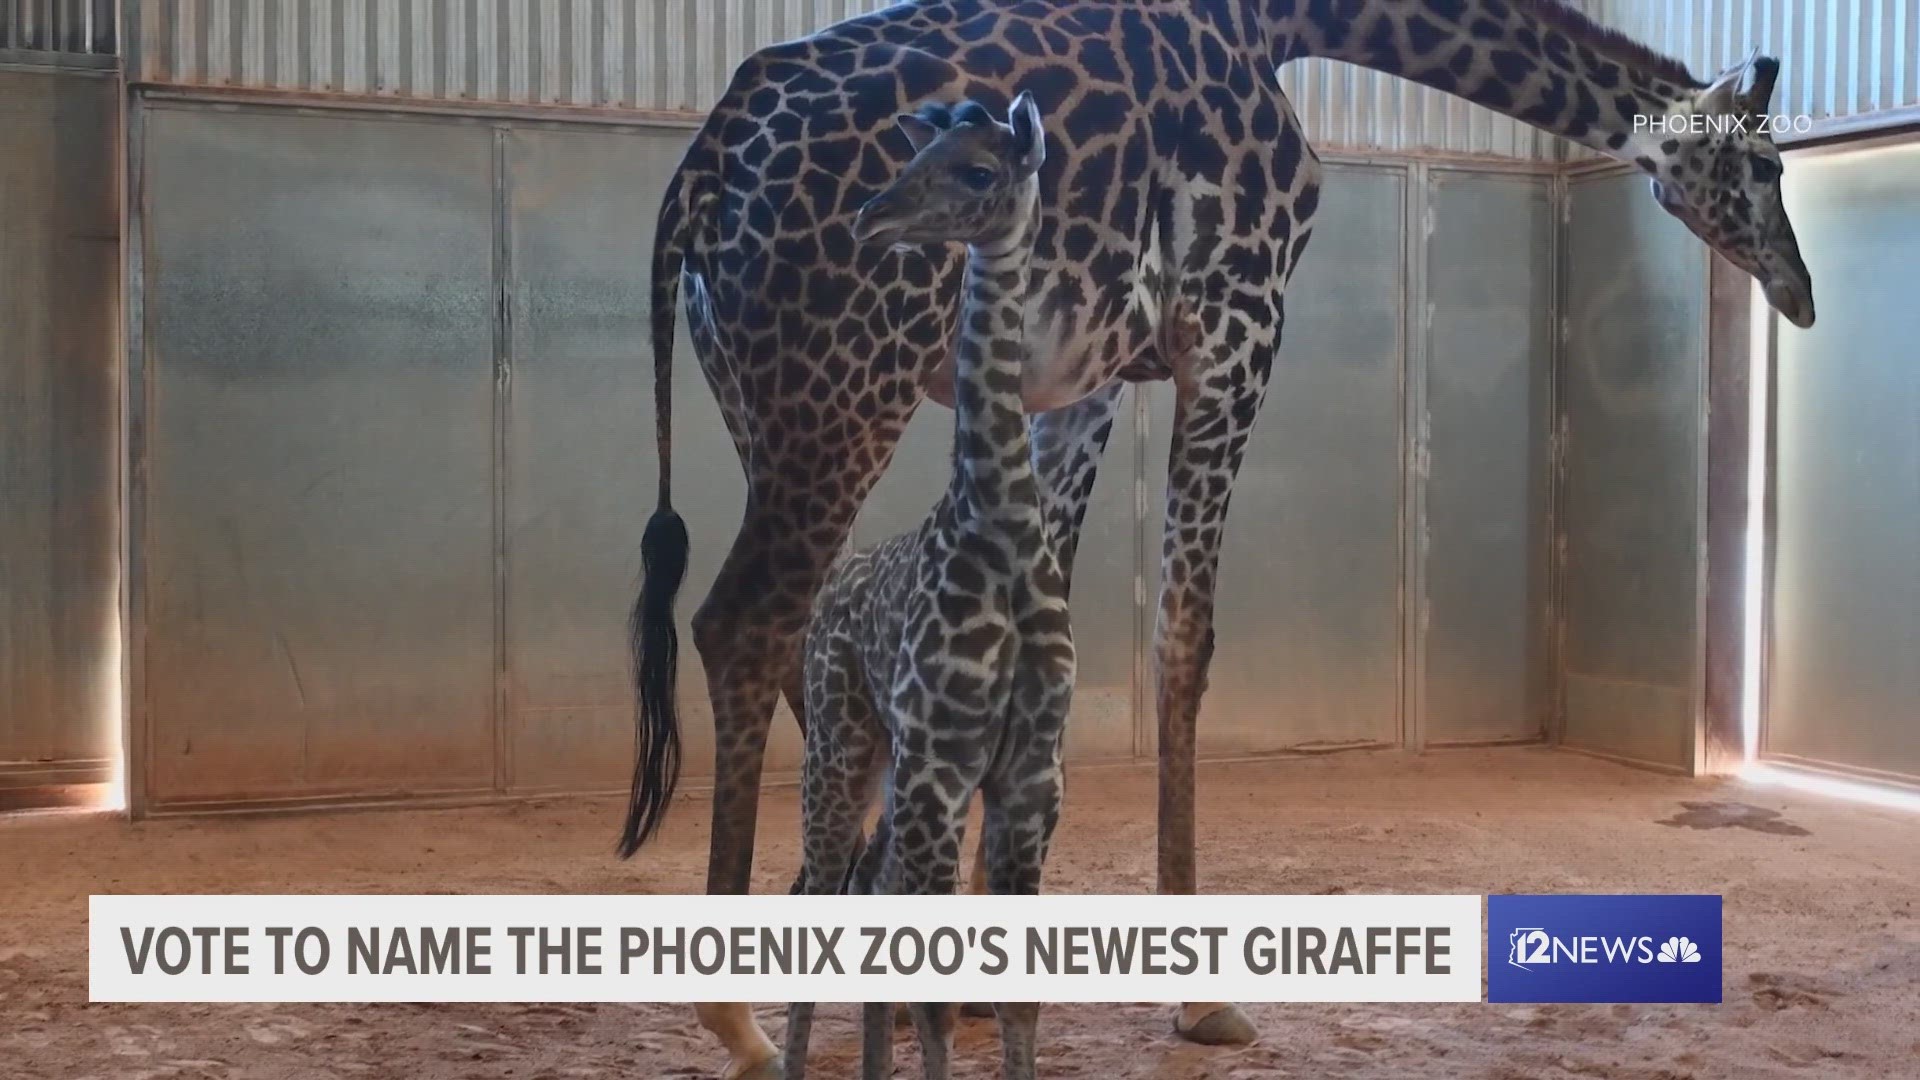 Sunshine, one of the zoo's beloved Masai giraffes, gave birth to the baby girl on Oct. 25.